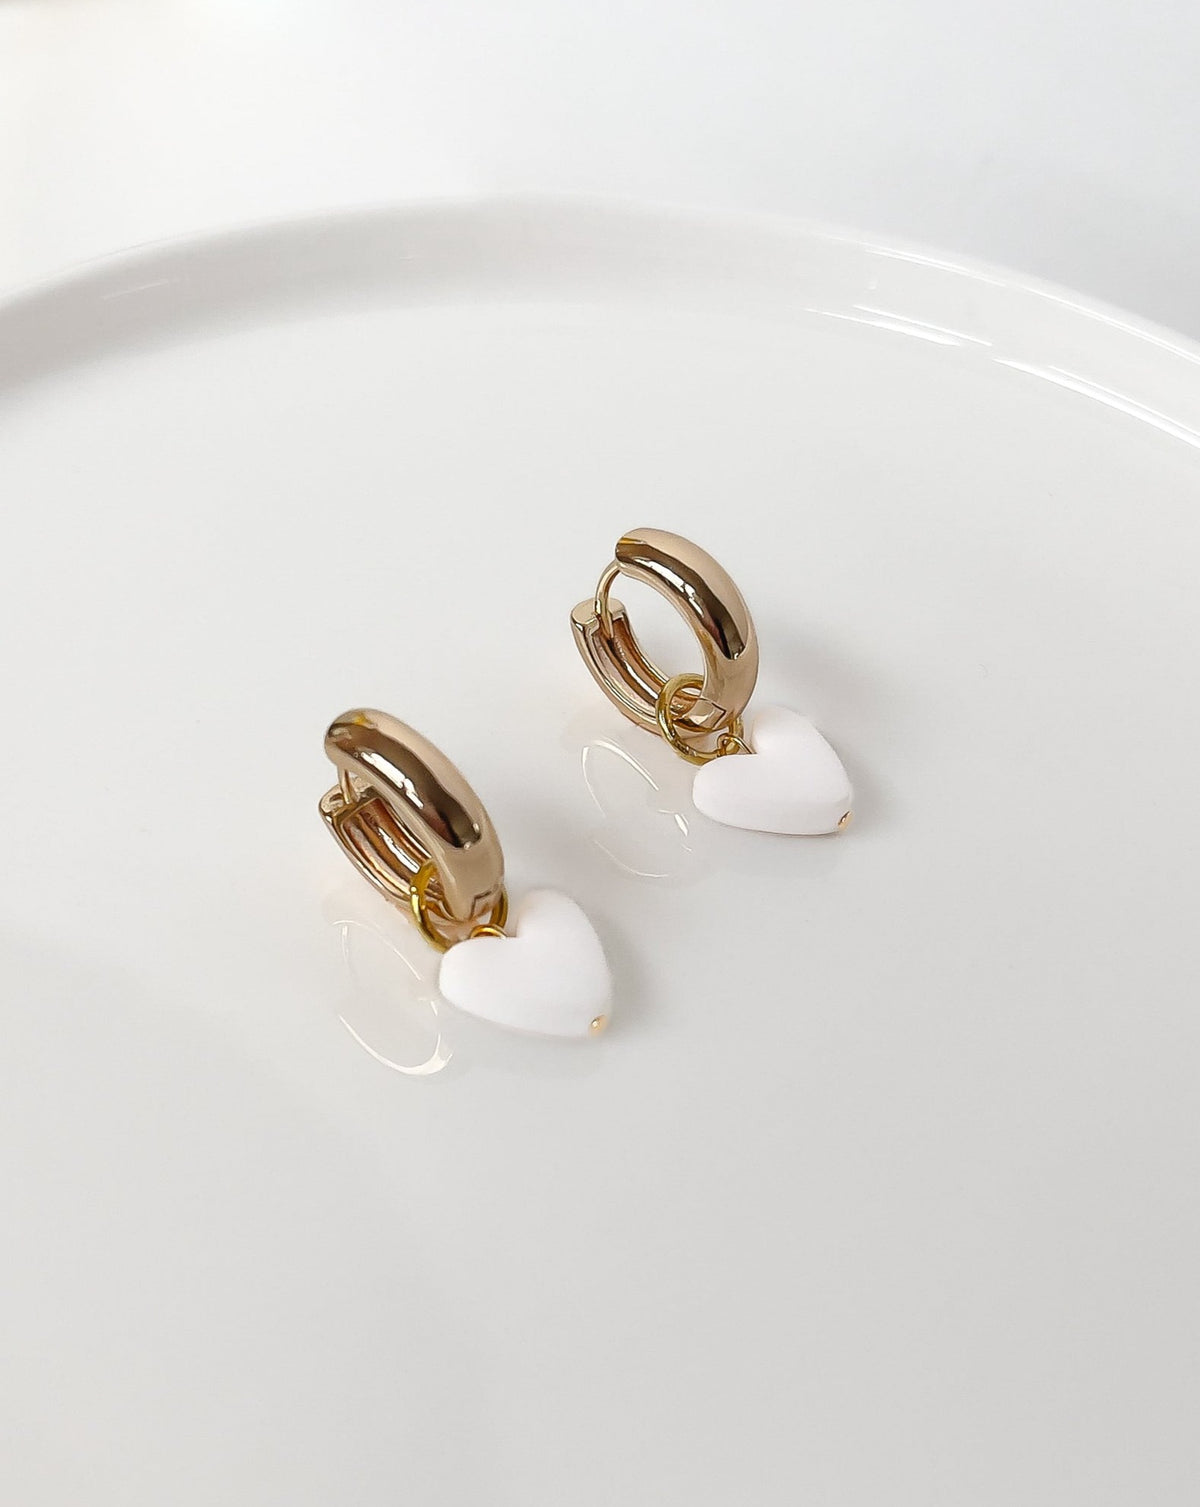 Angled view of Charming Heart earrings with Gold Hoops and White Heart charm.